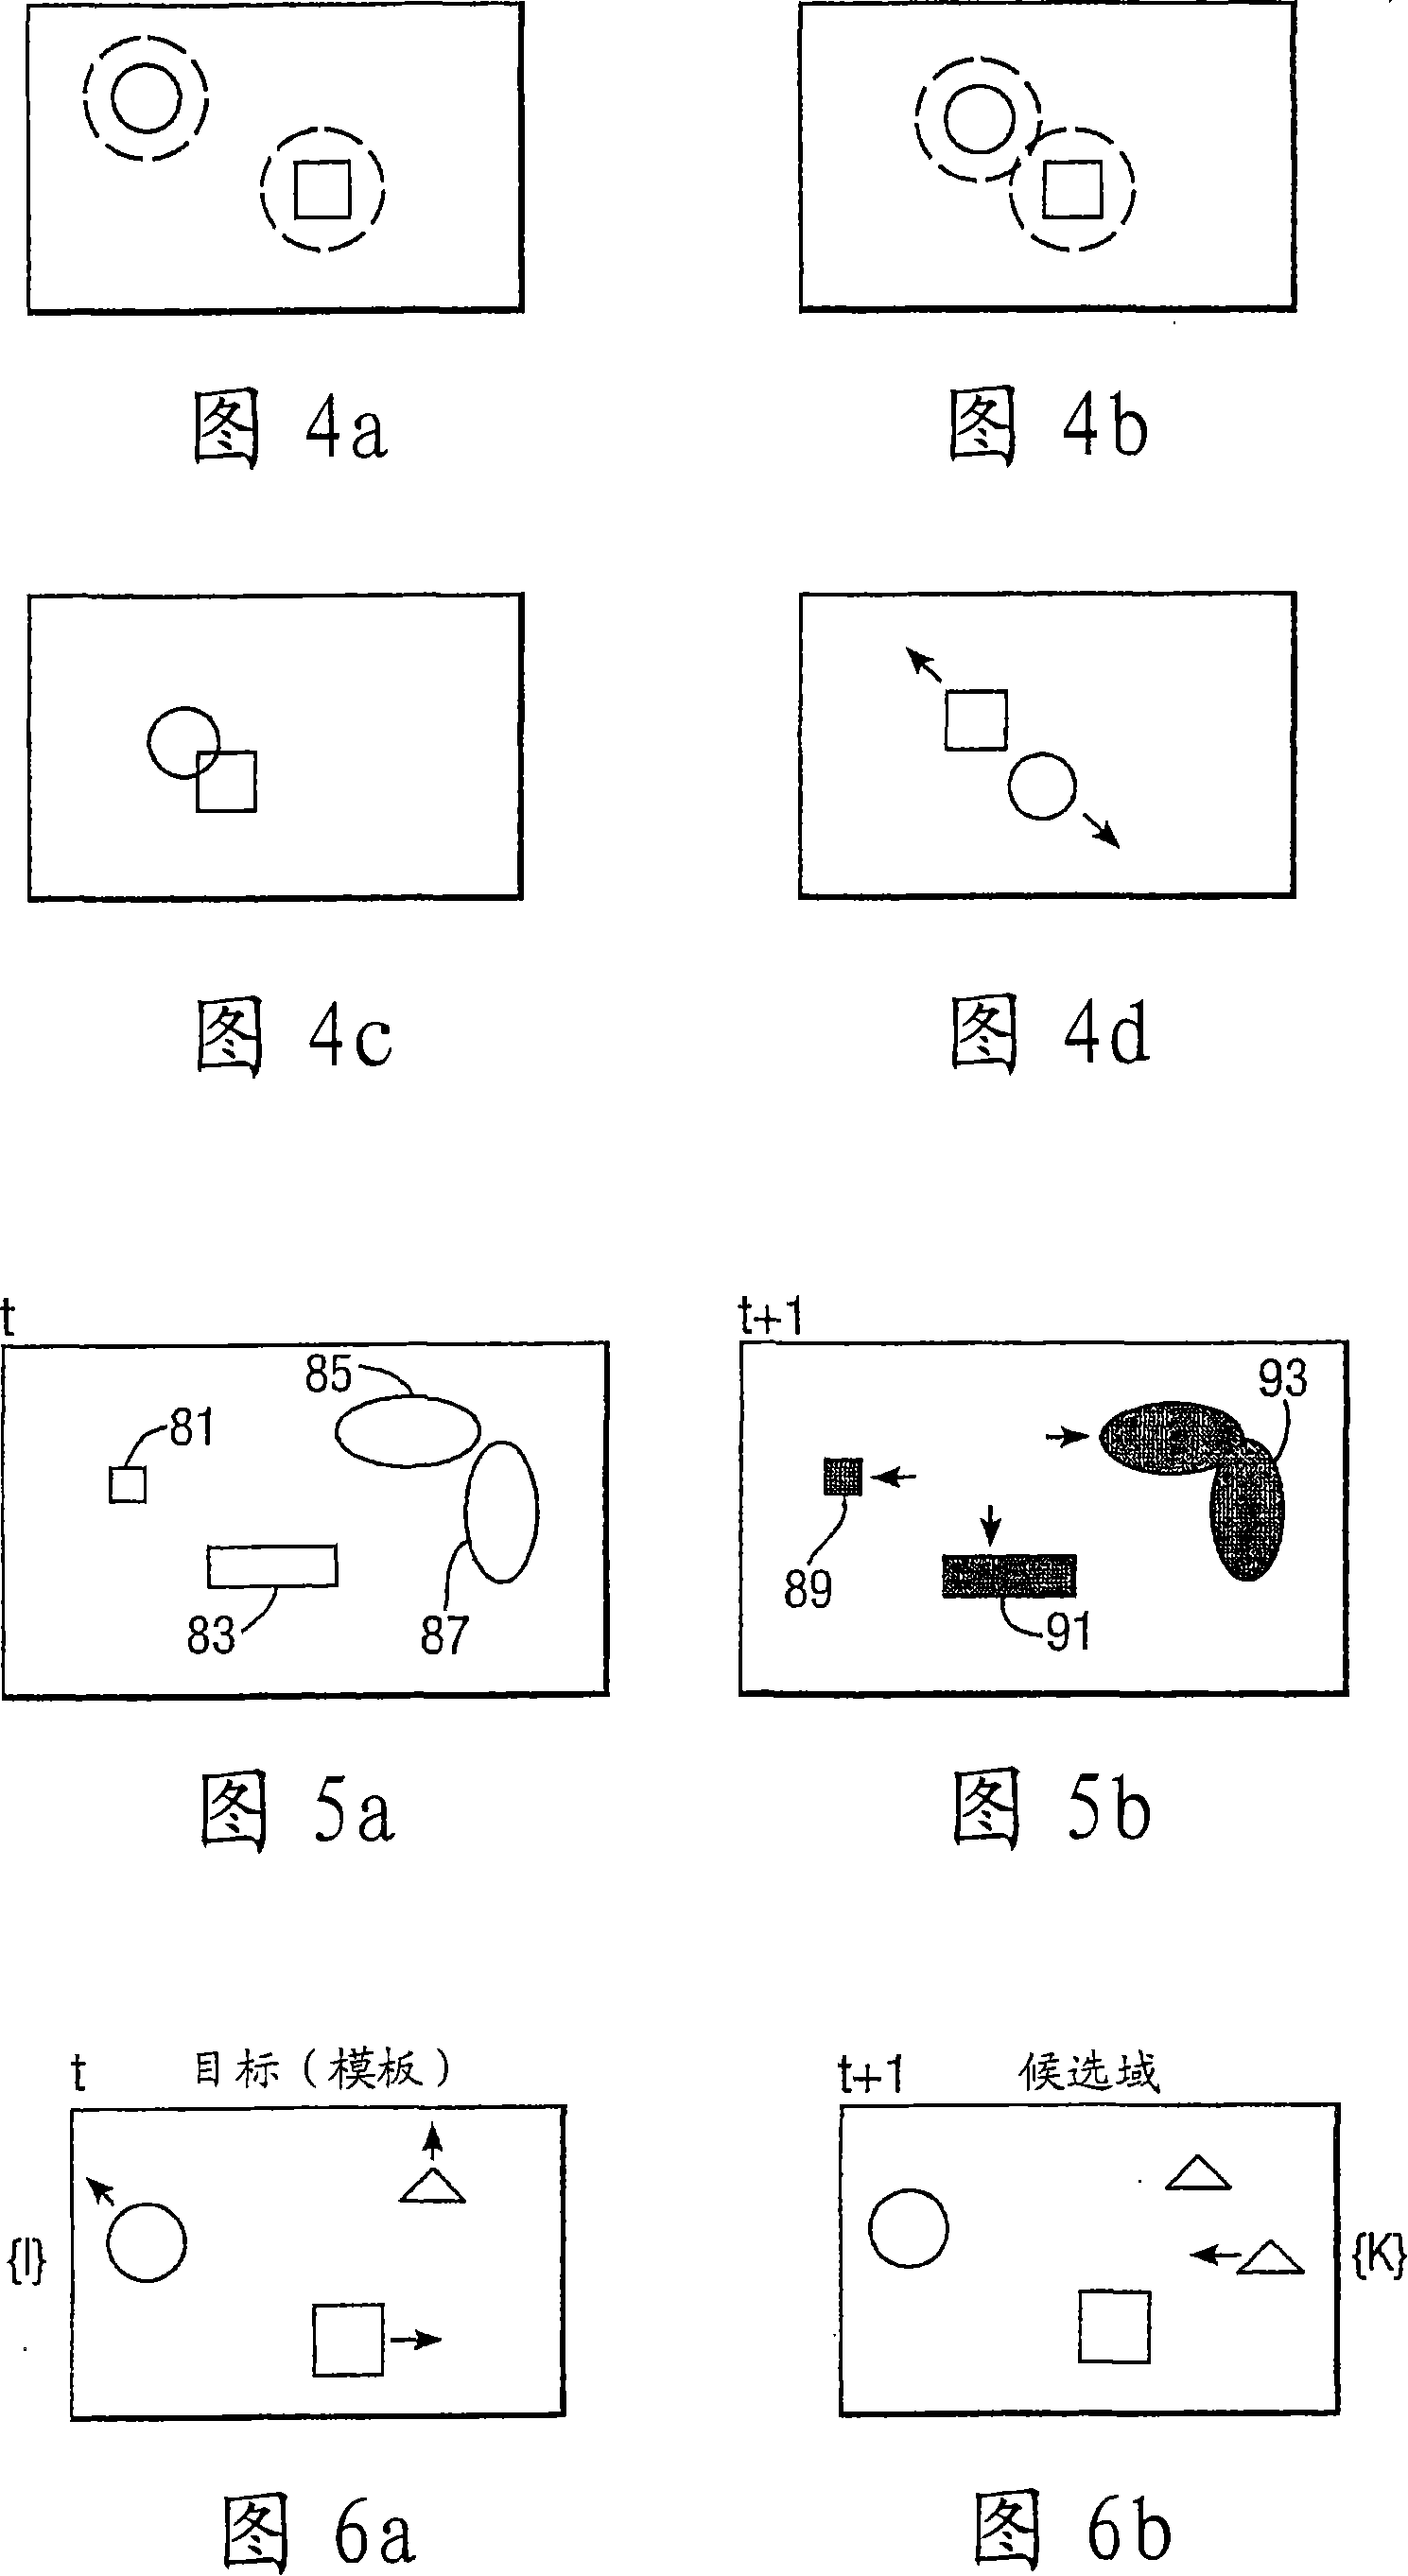 Method of tracking objects in a video sequence